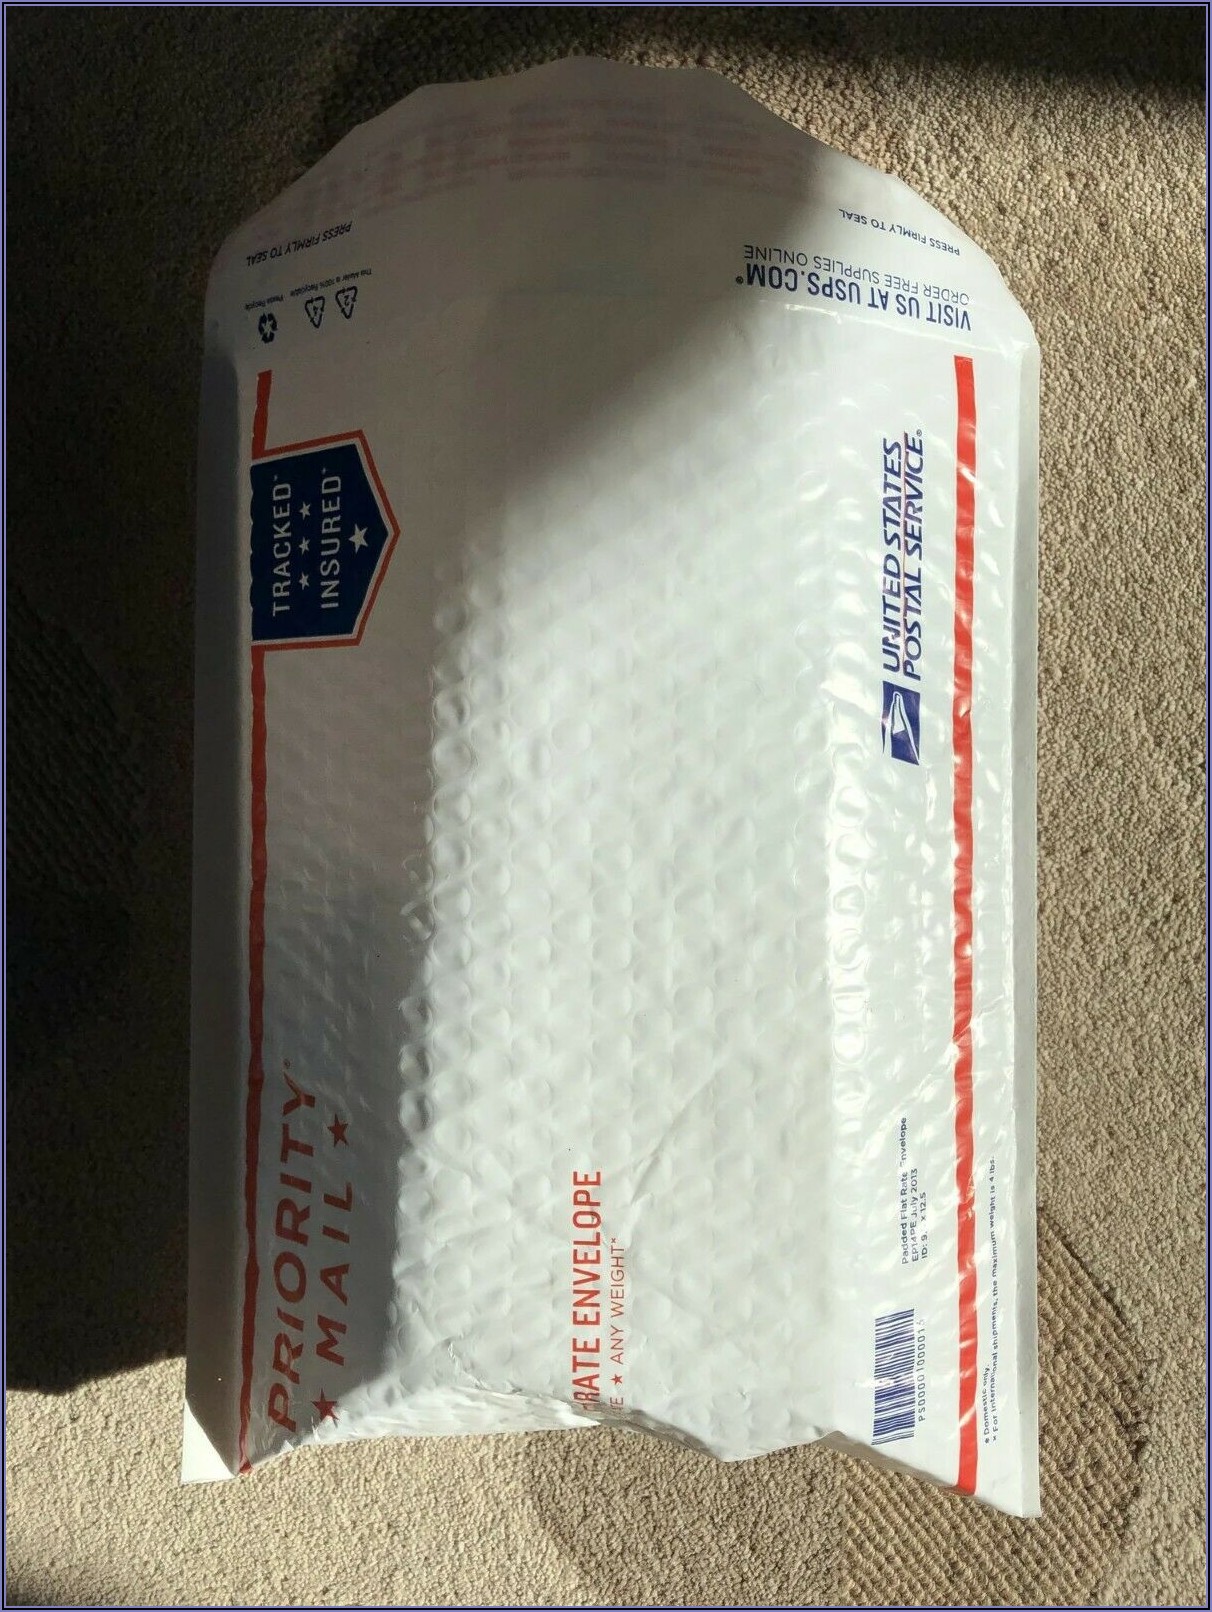 usps priority mail flat rate envelope to canada